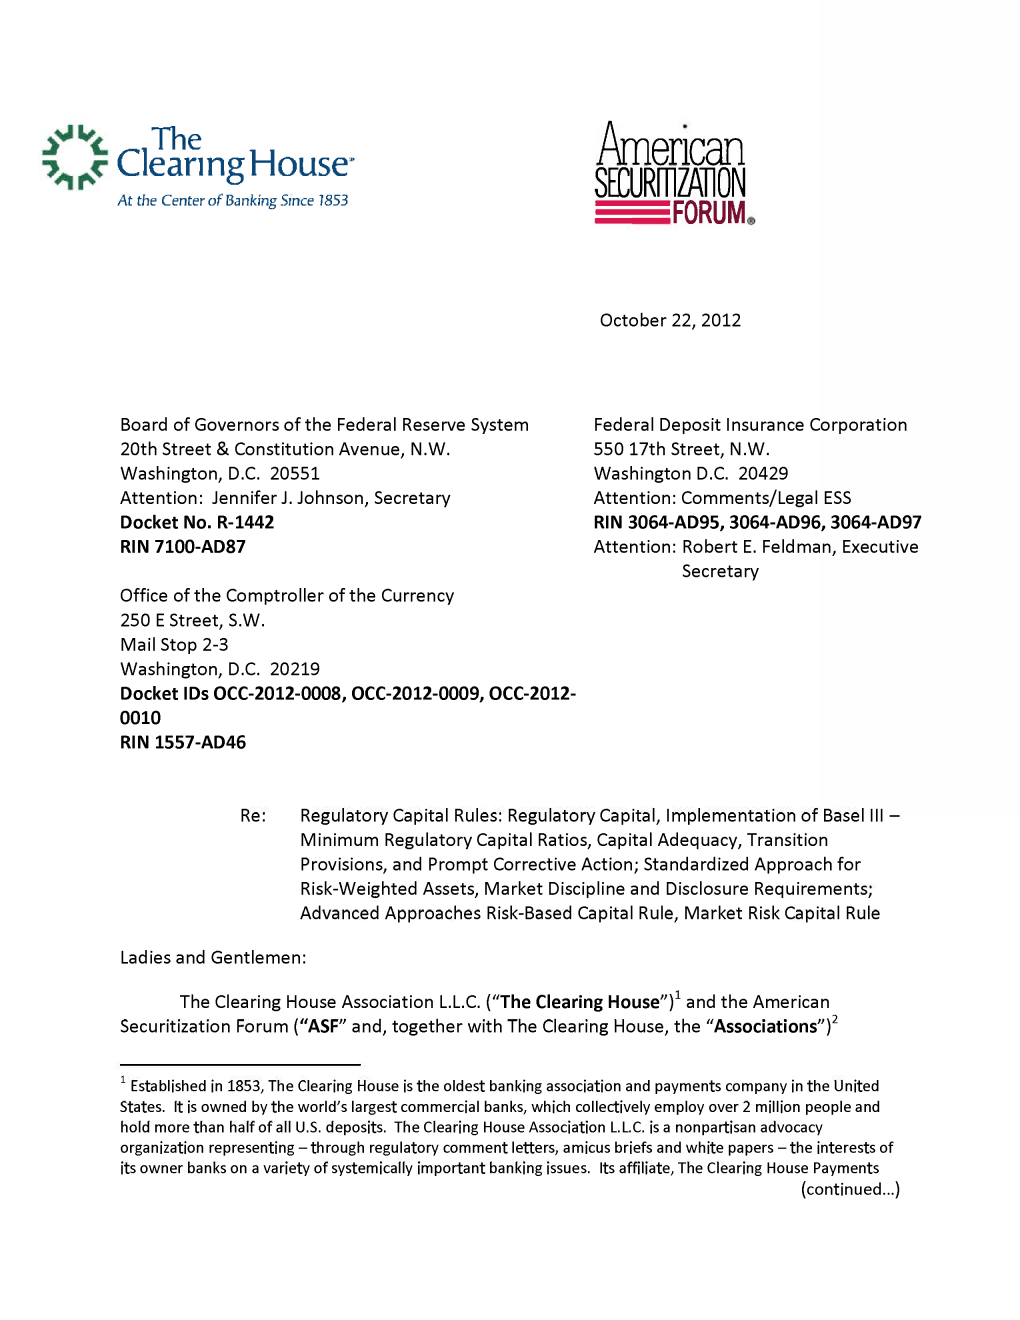 Comments of the Clearing House and the American Securitization Forum